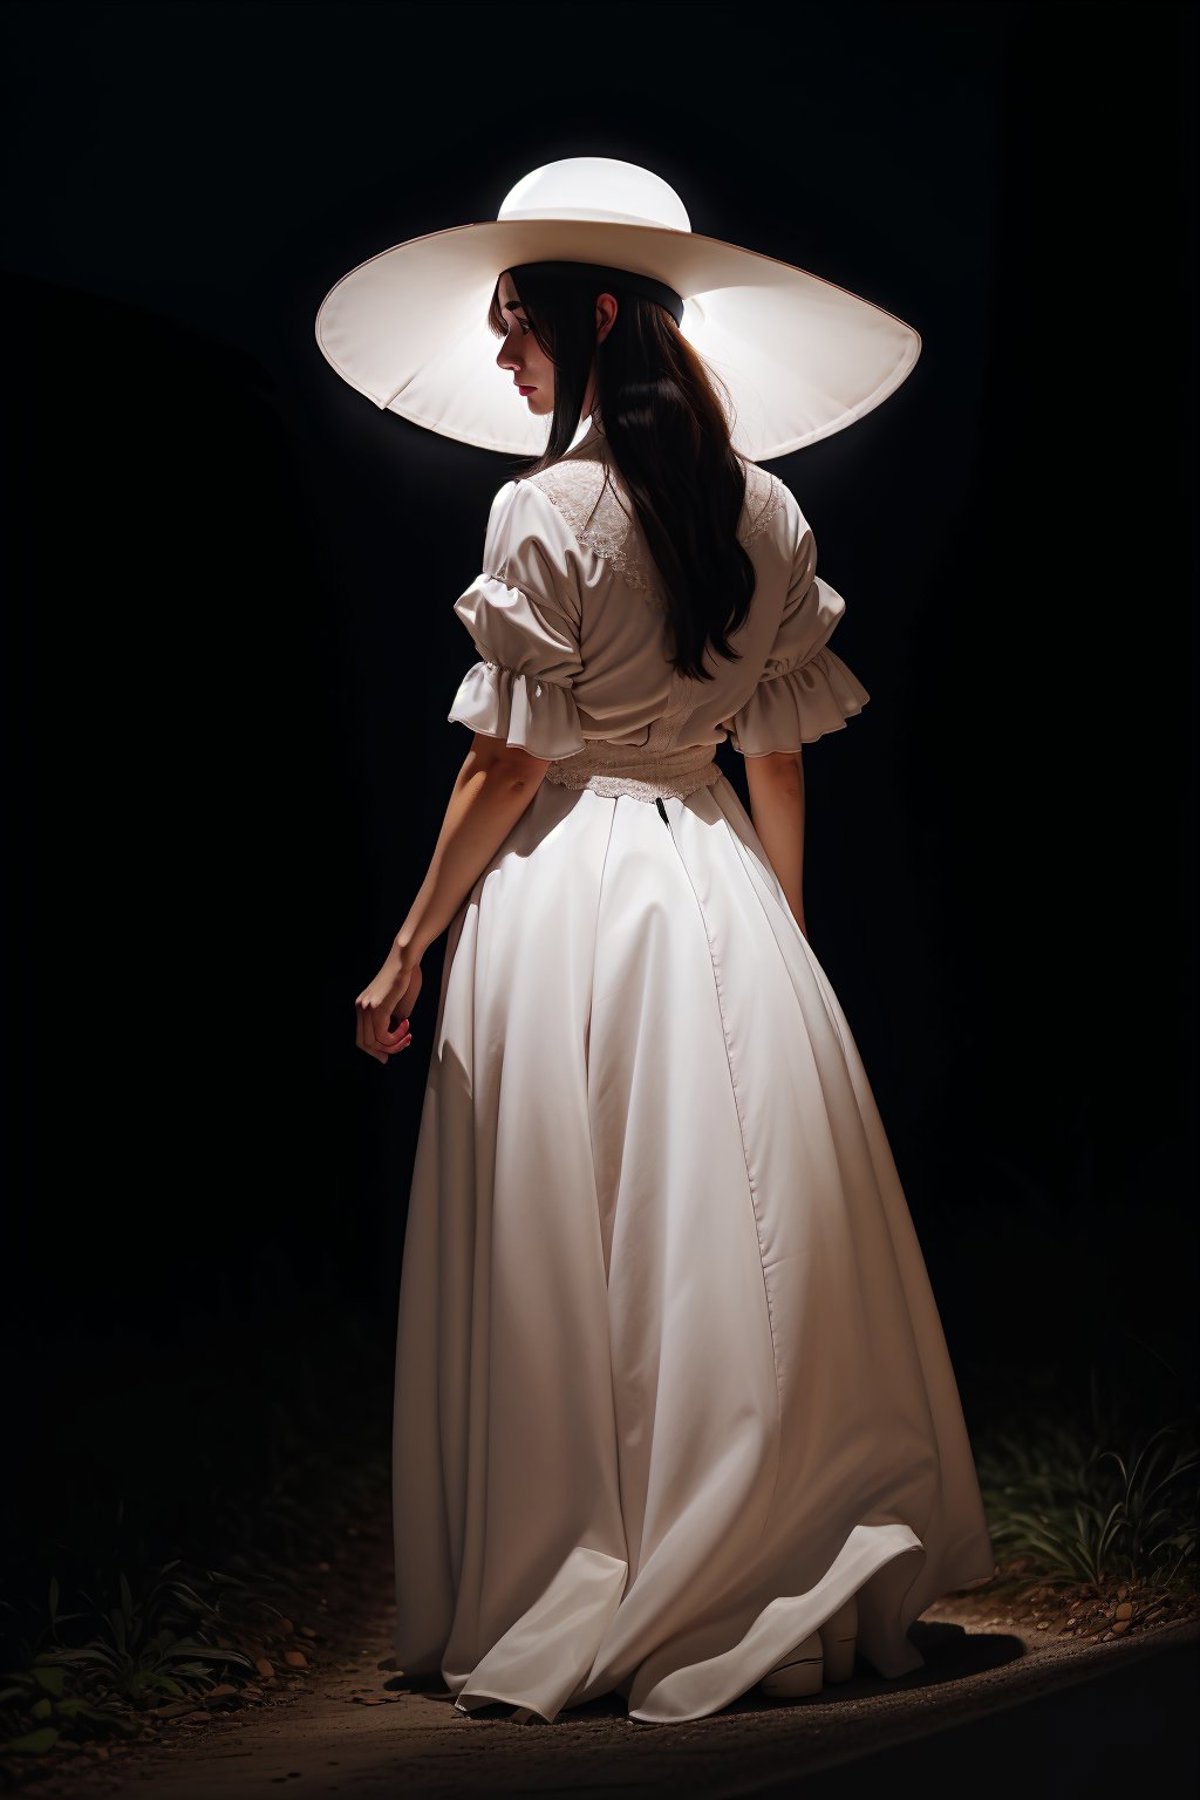 A young lady wearing a white dress standing in the dark with her back turned.